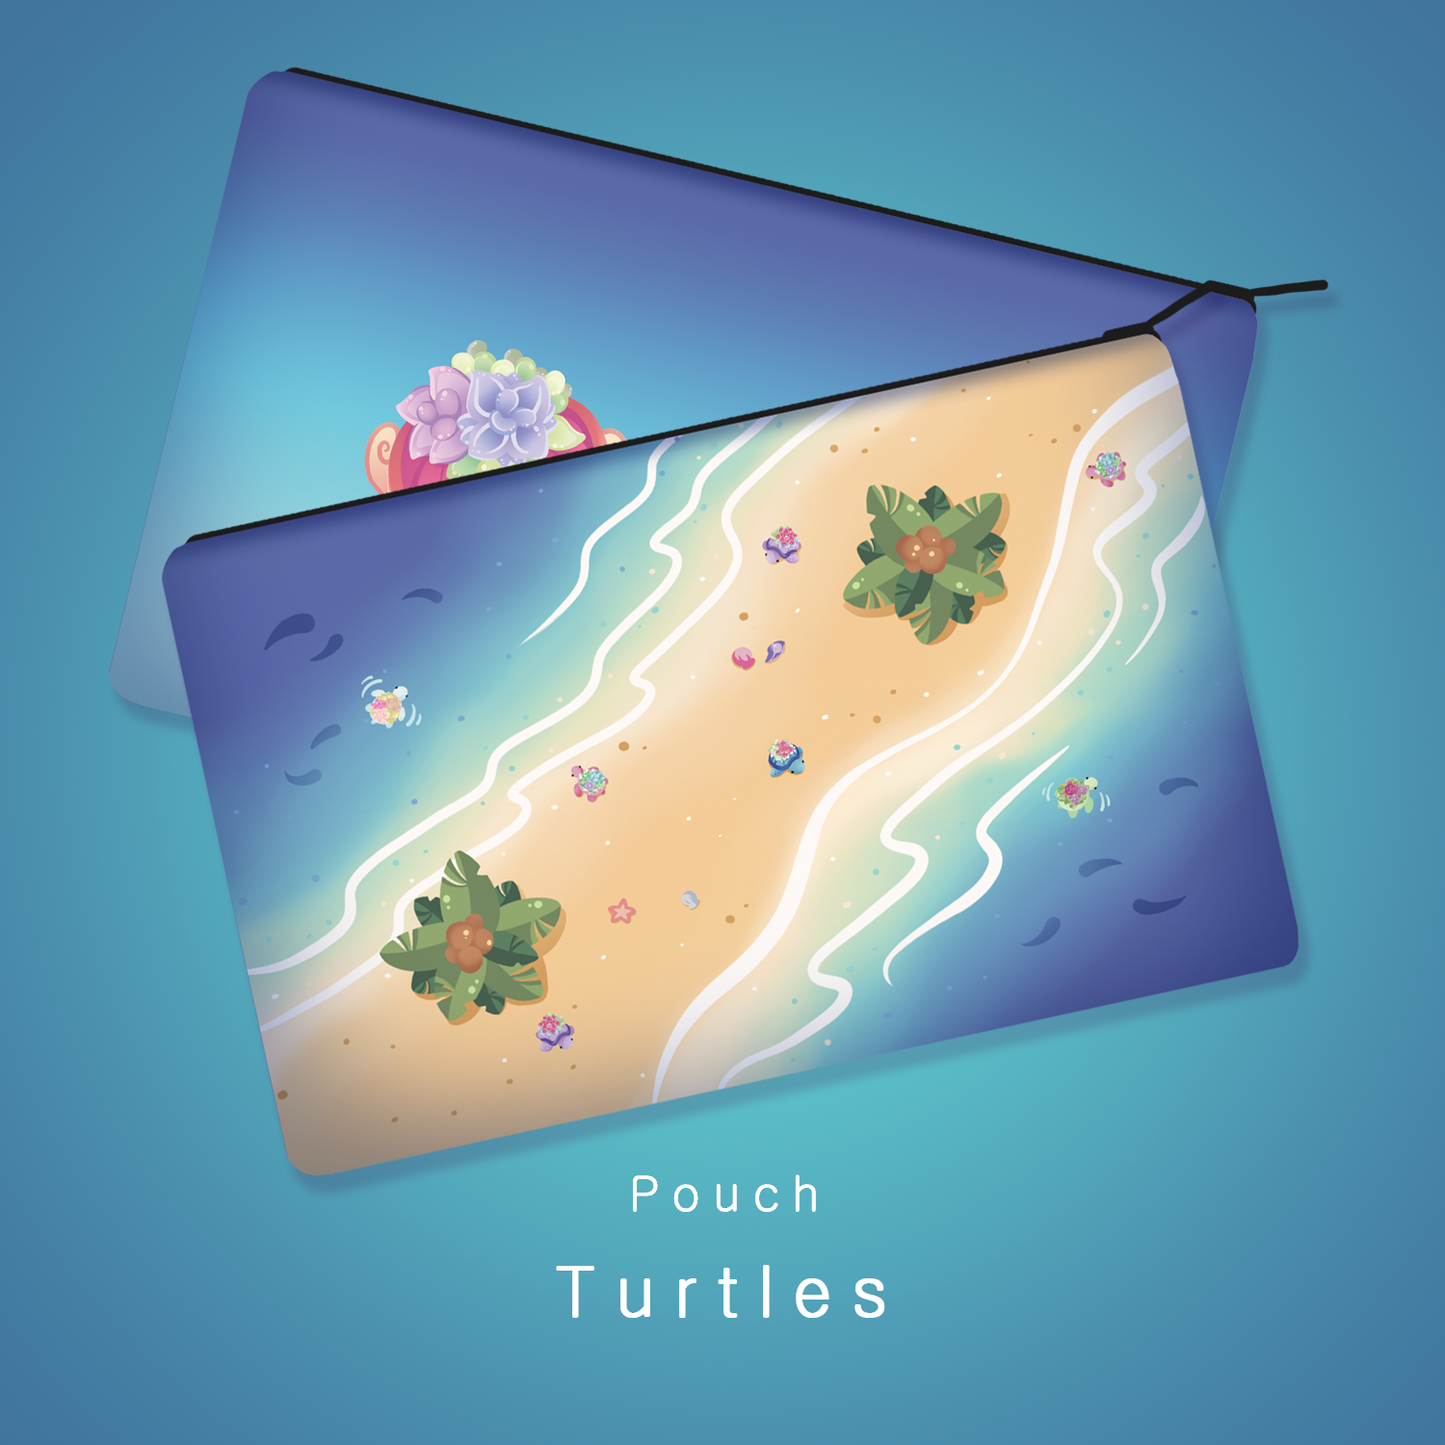 Turtles - Pouch